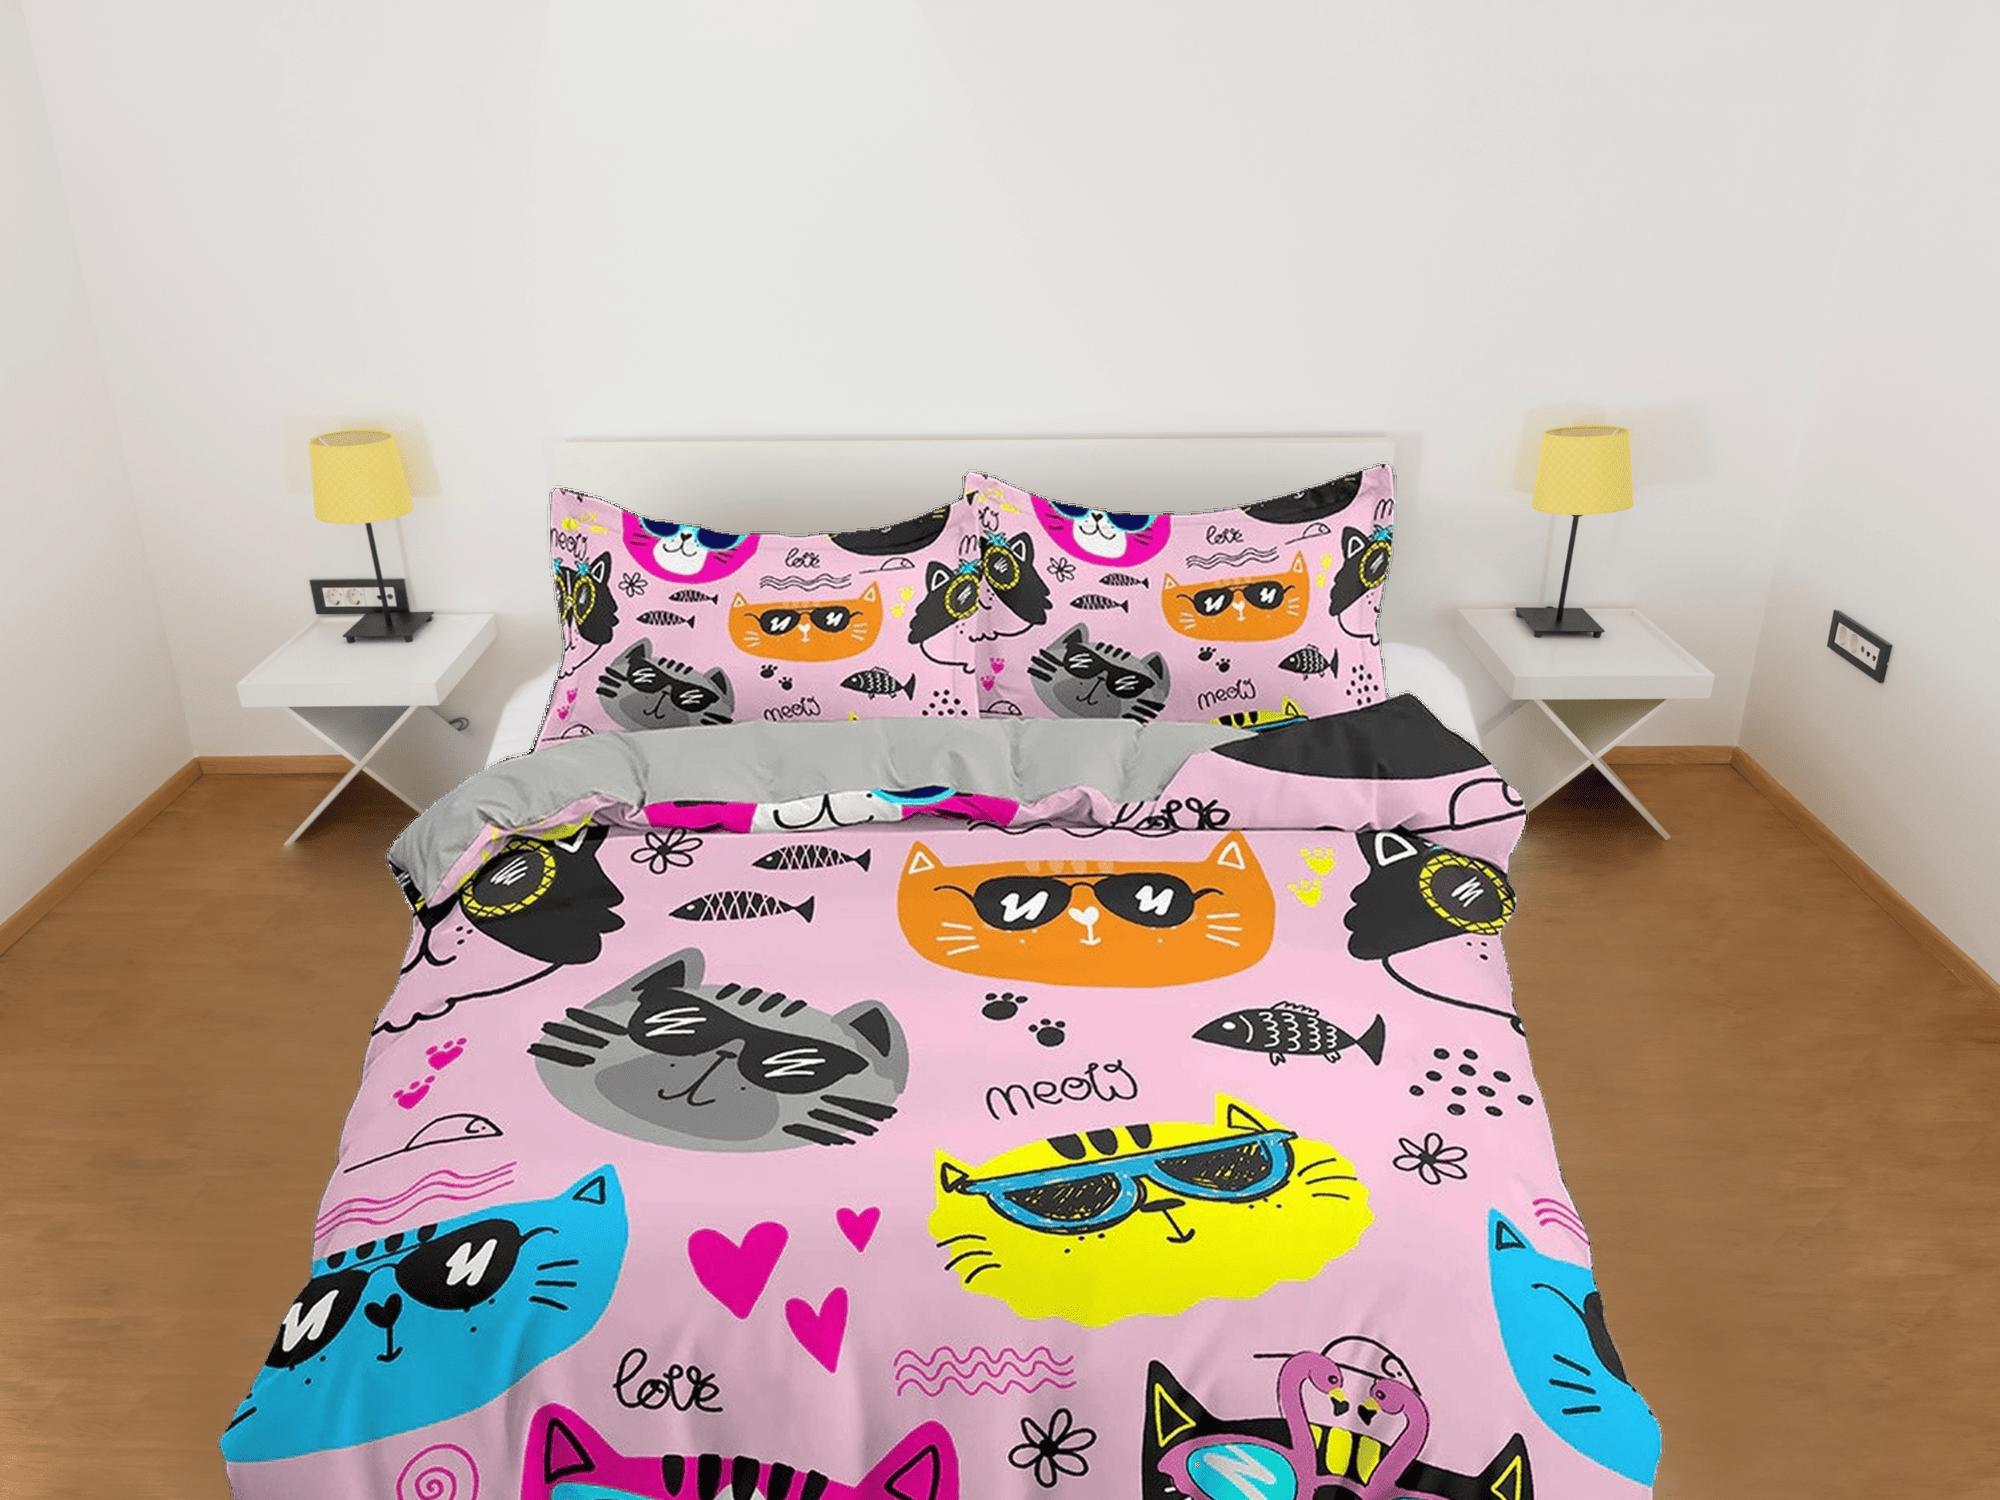 daintyduvet Cool Cats in Different Colors Kids Pink Duvet Cover Set, Toddler Bedding, Kids Bedroom, Cute Bedding, Duvet King Queen Full Twin Single